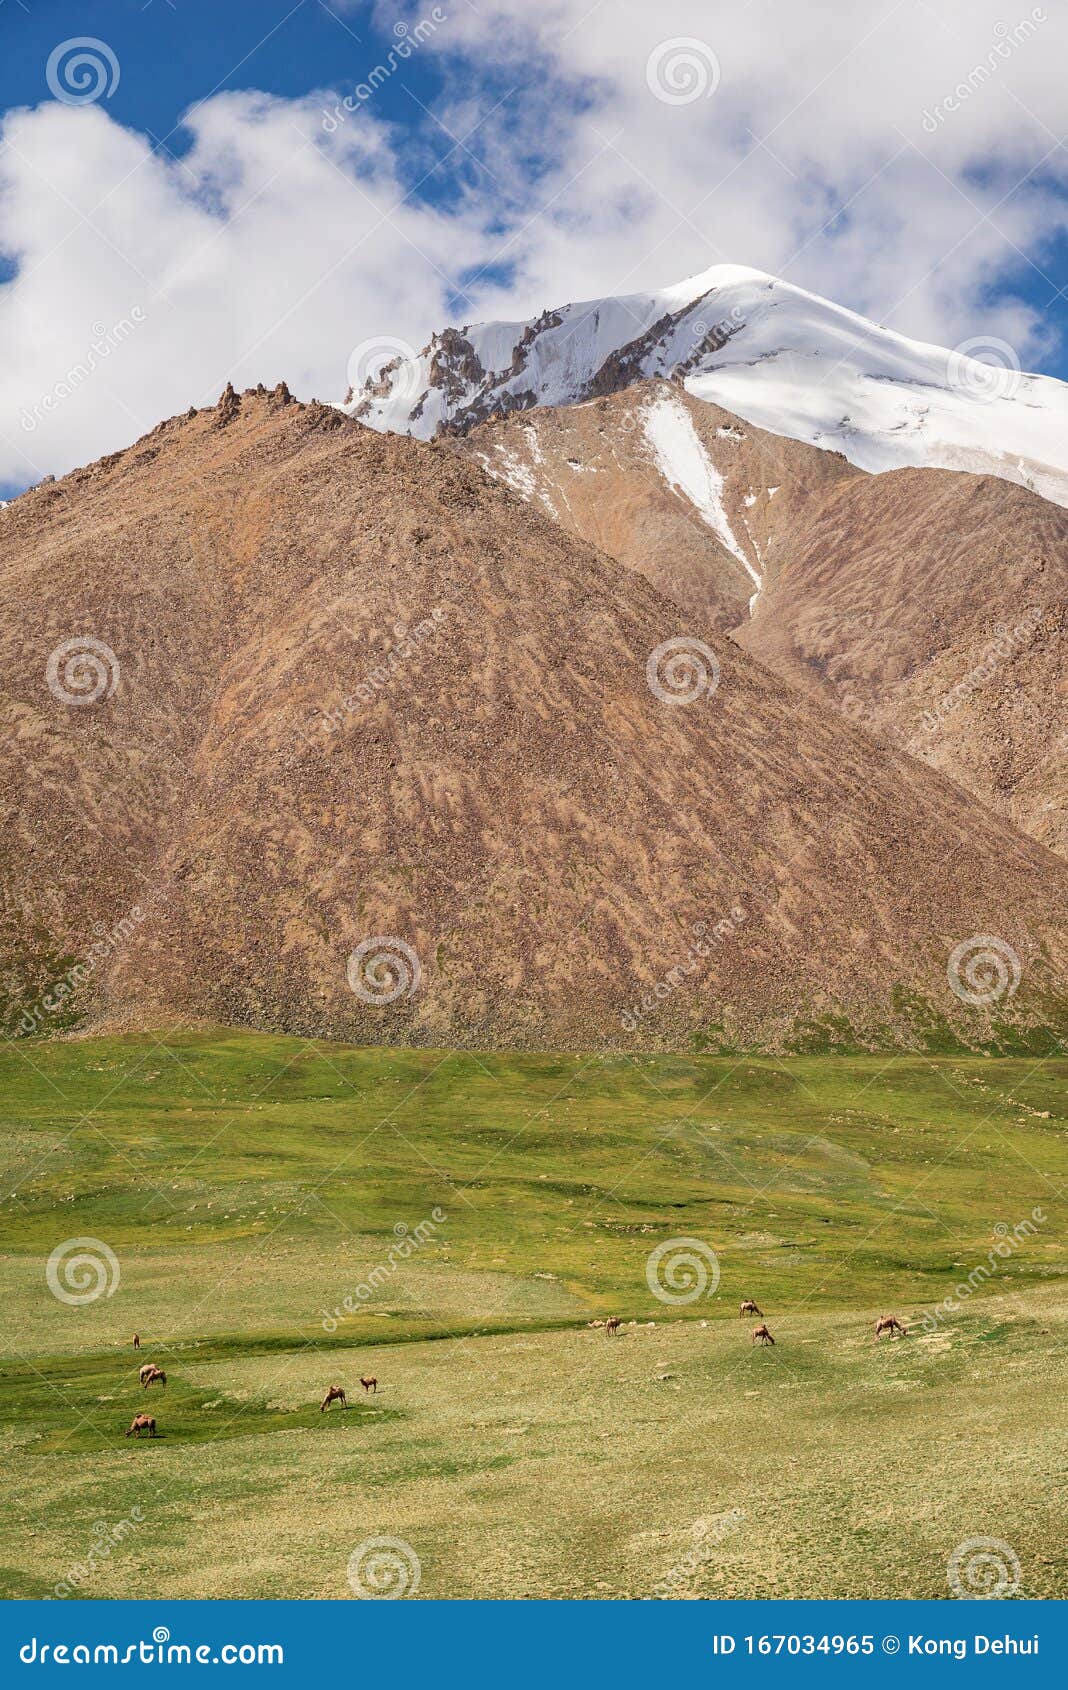 Majestic Snow Capped Mountain Peak With Green Alpine Meadows Stock